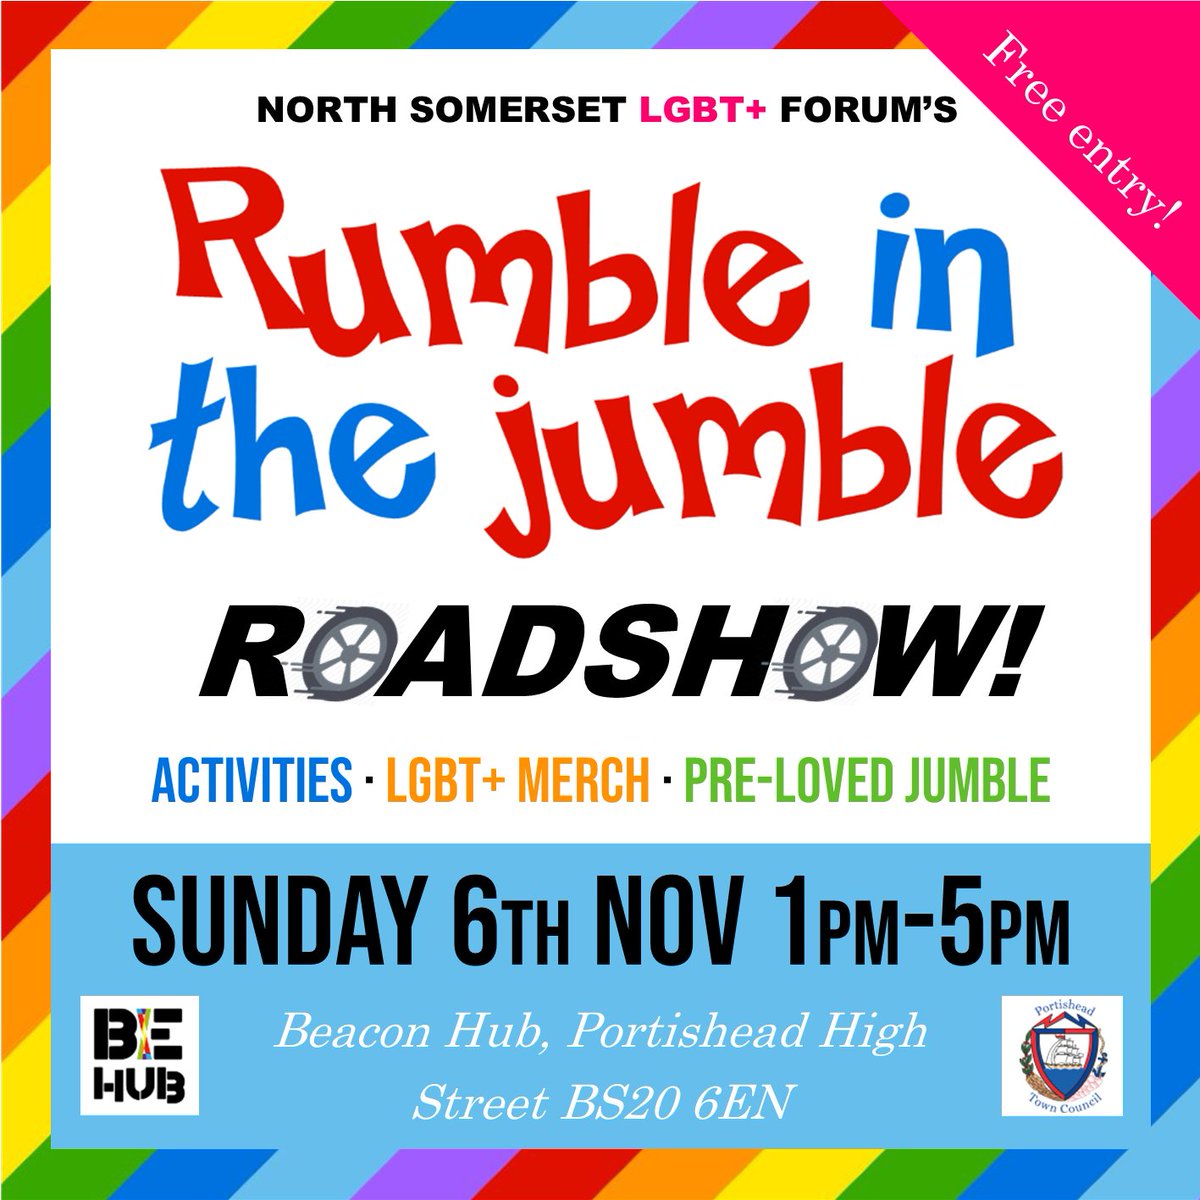 Join us this Sunday at the Beacon Hub on Portishead High Street for another Rumble in the Jumble event! We will have pre-loved items, LGBT+ merch and activities to enjoy, so why not pop by and say hi? @PortisheadTownC